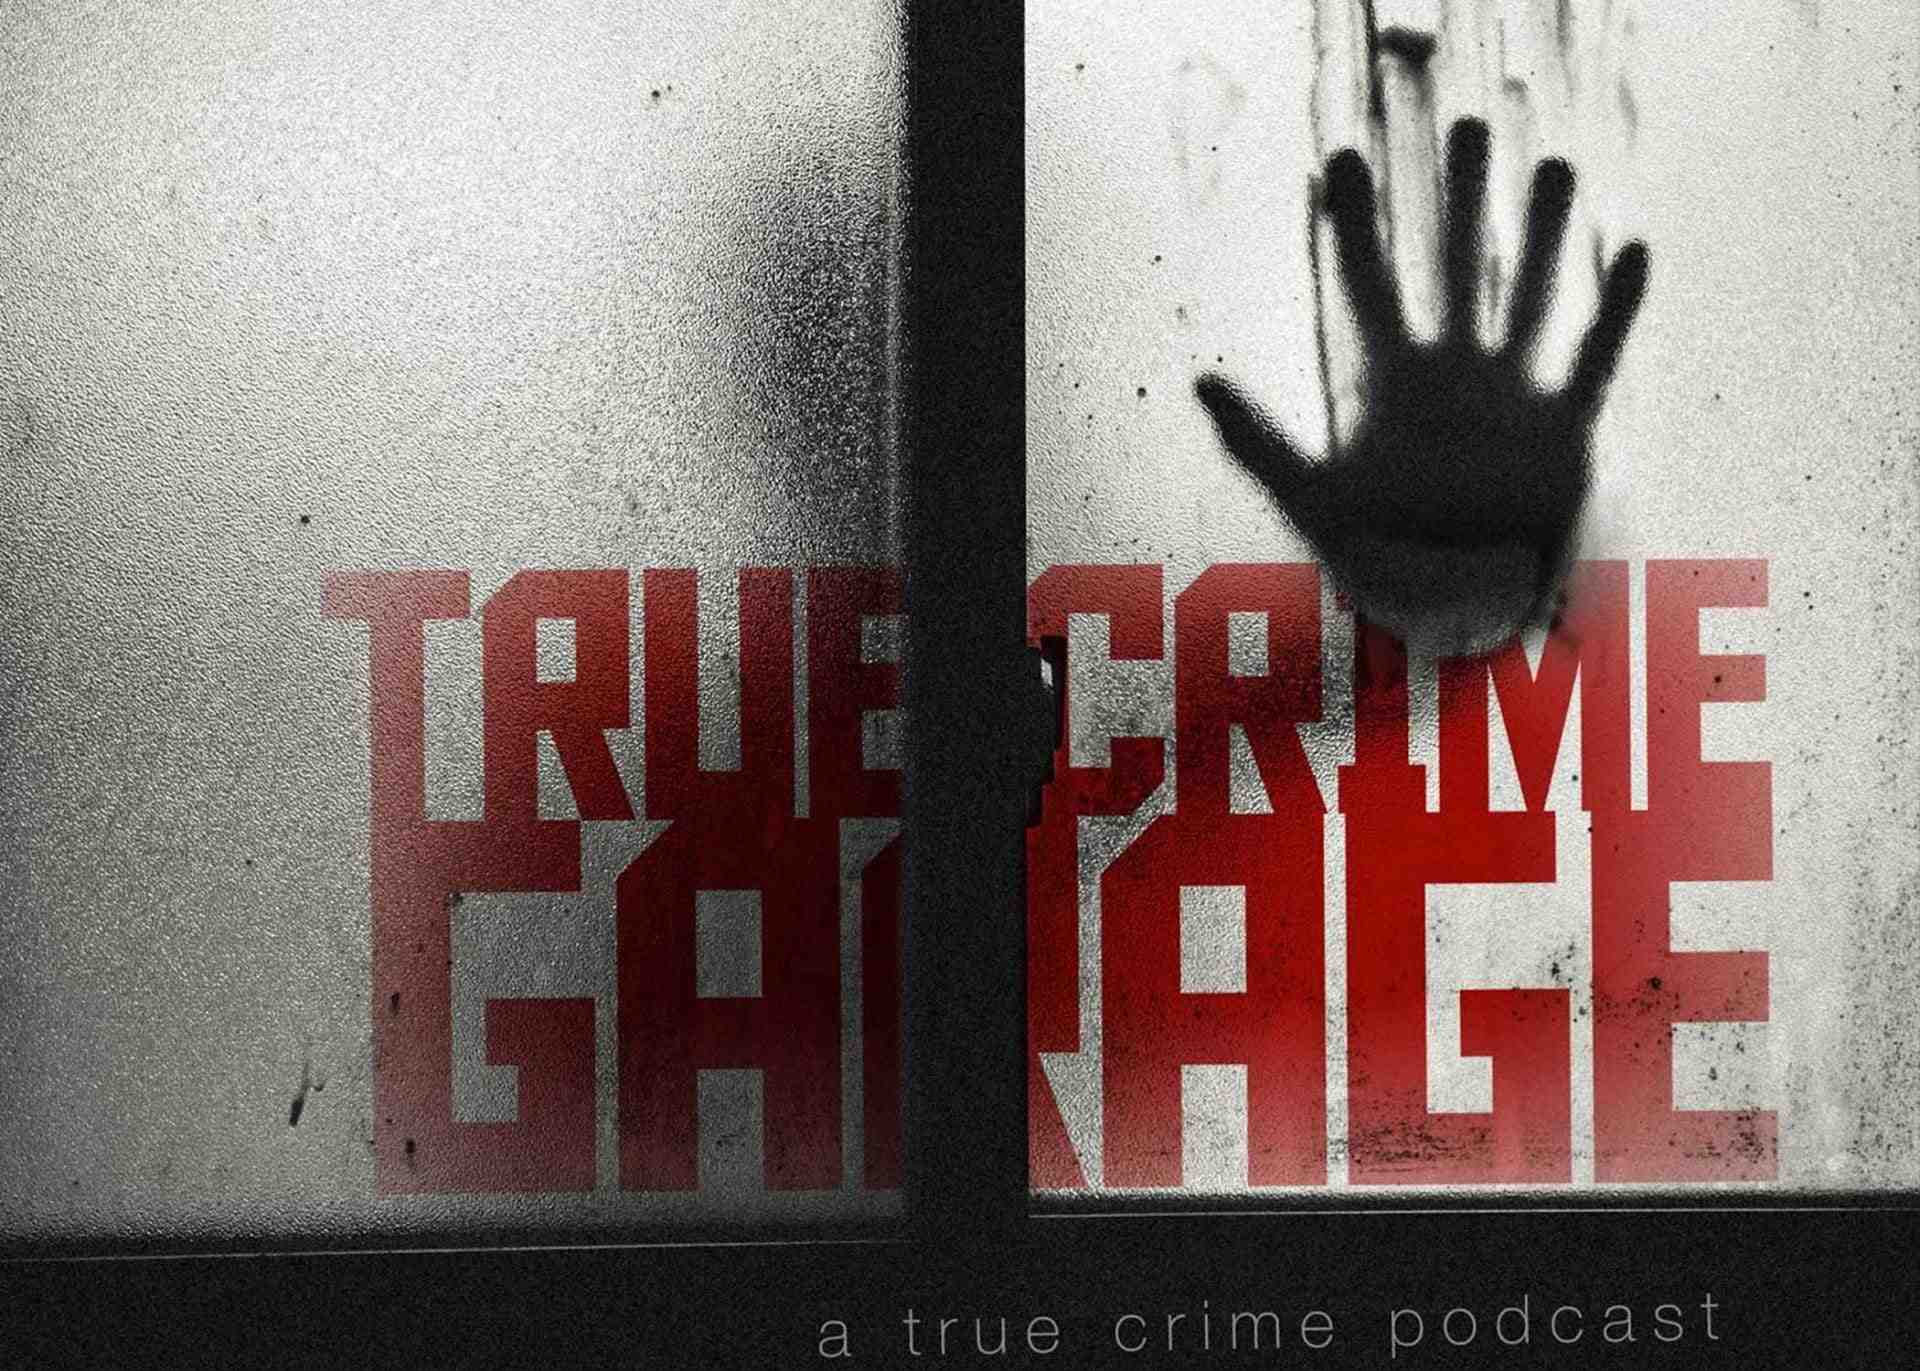 Grip your seats, we're navigating the best episodes of True Crime Garage with a tenacity that'll fuel your dark fascination. Never bored, always horrified – welcome aboard!